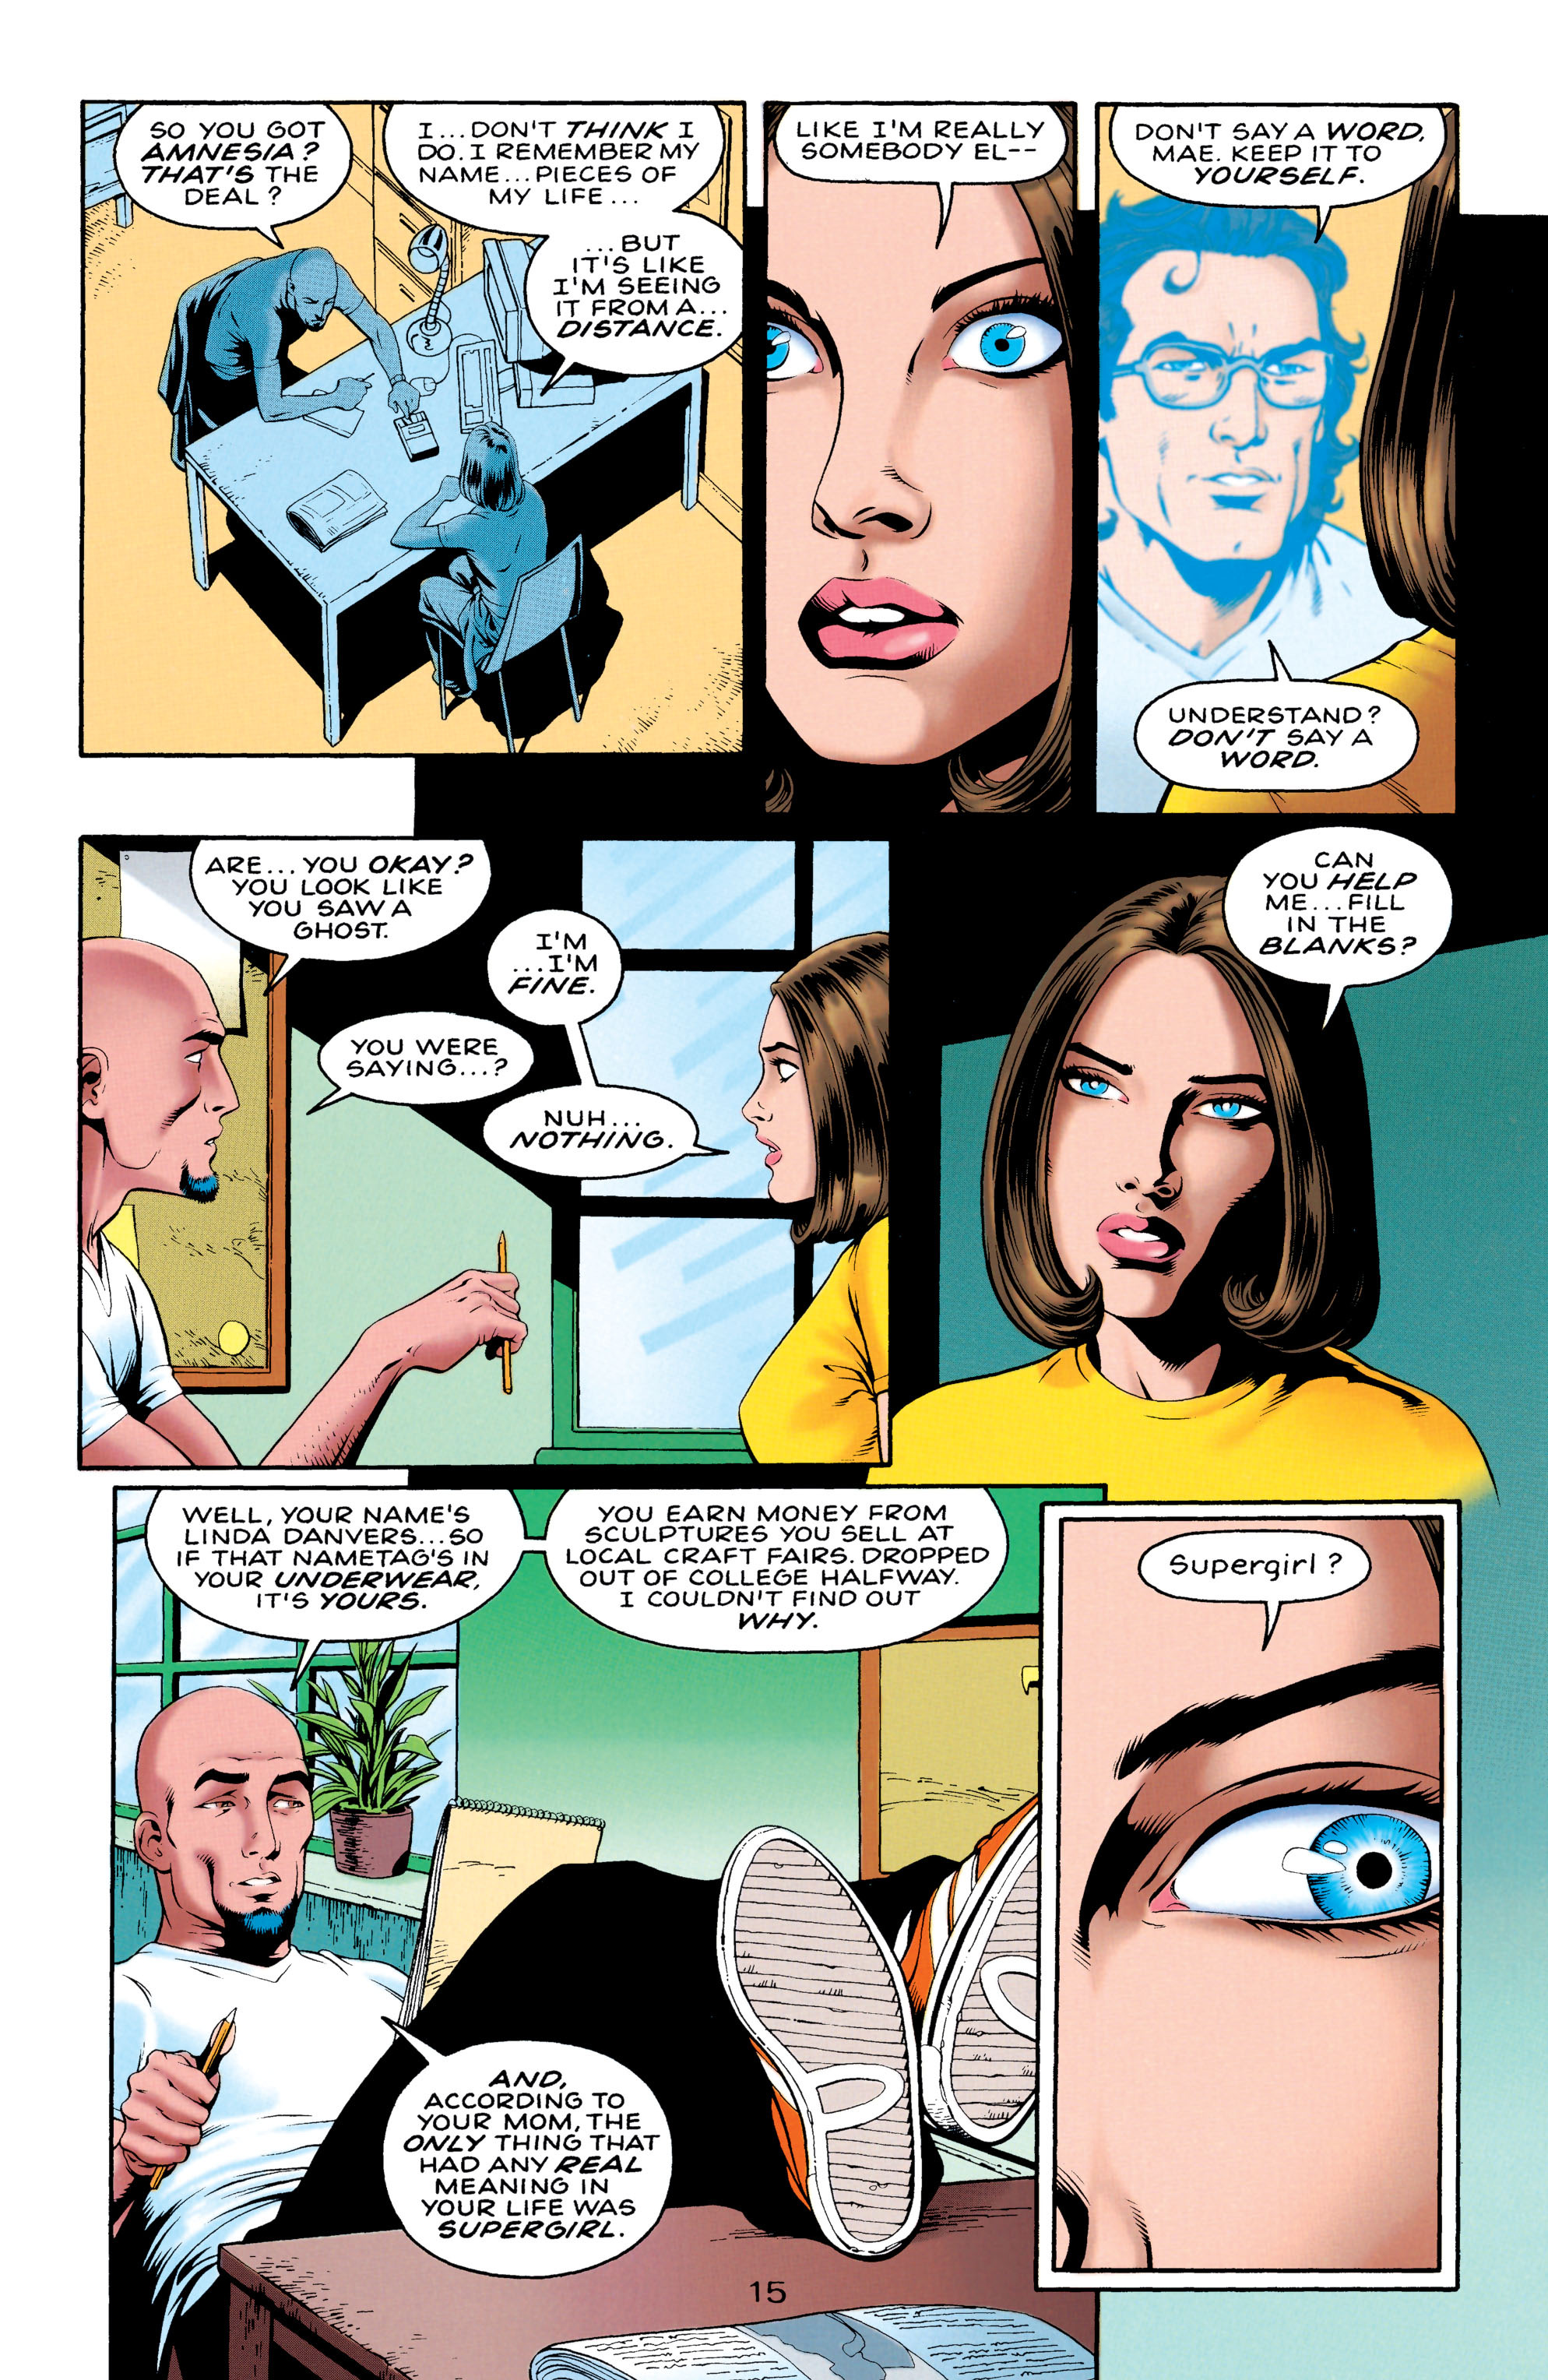 Supergirl (1996) 1 Page 15